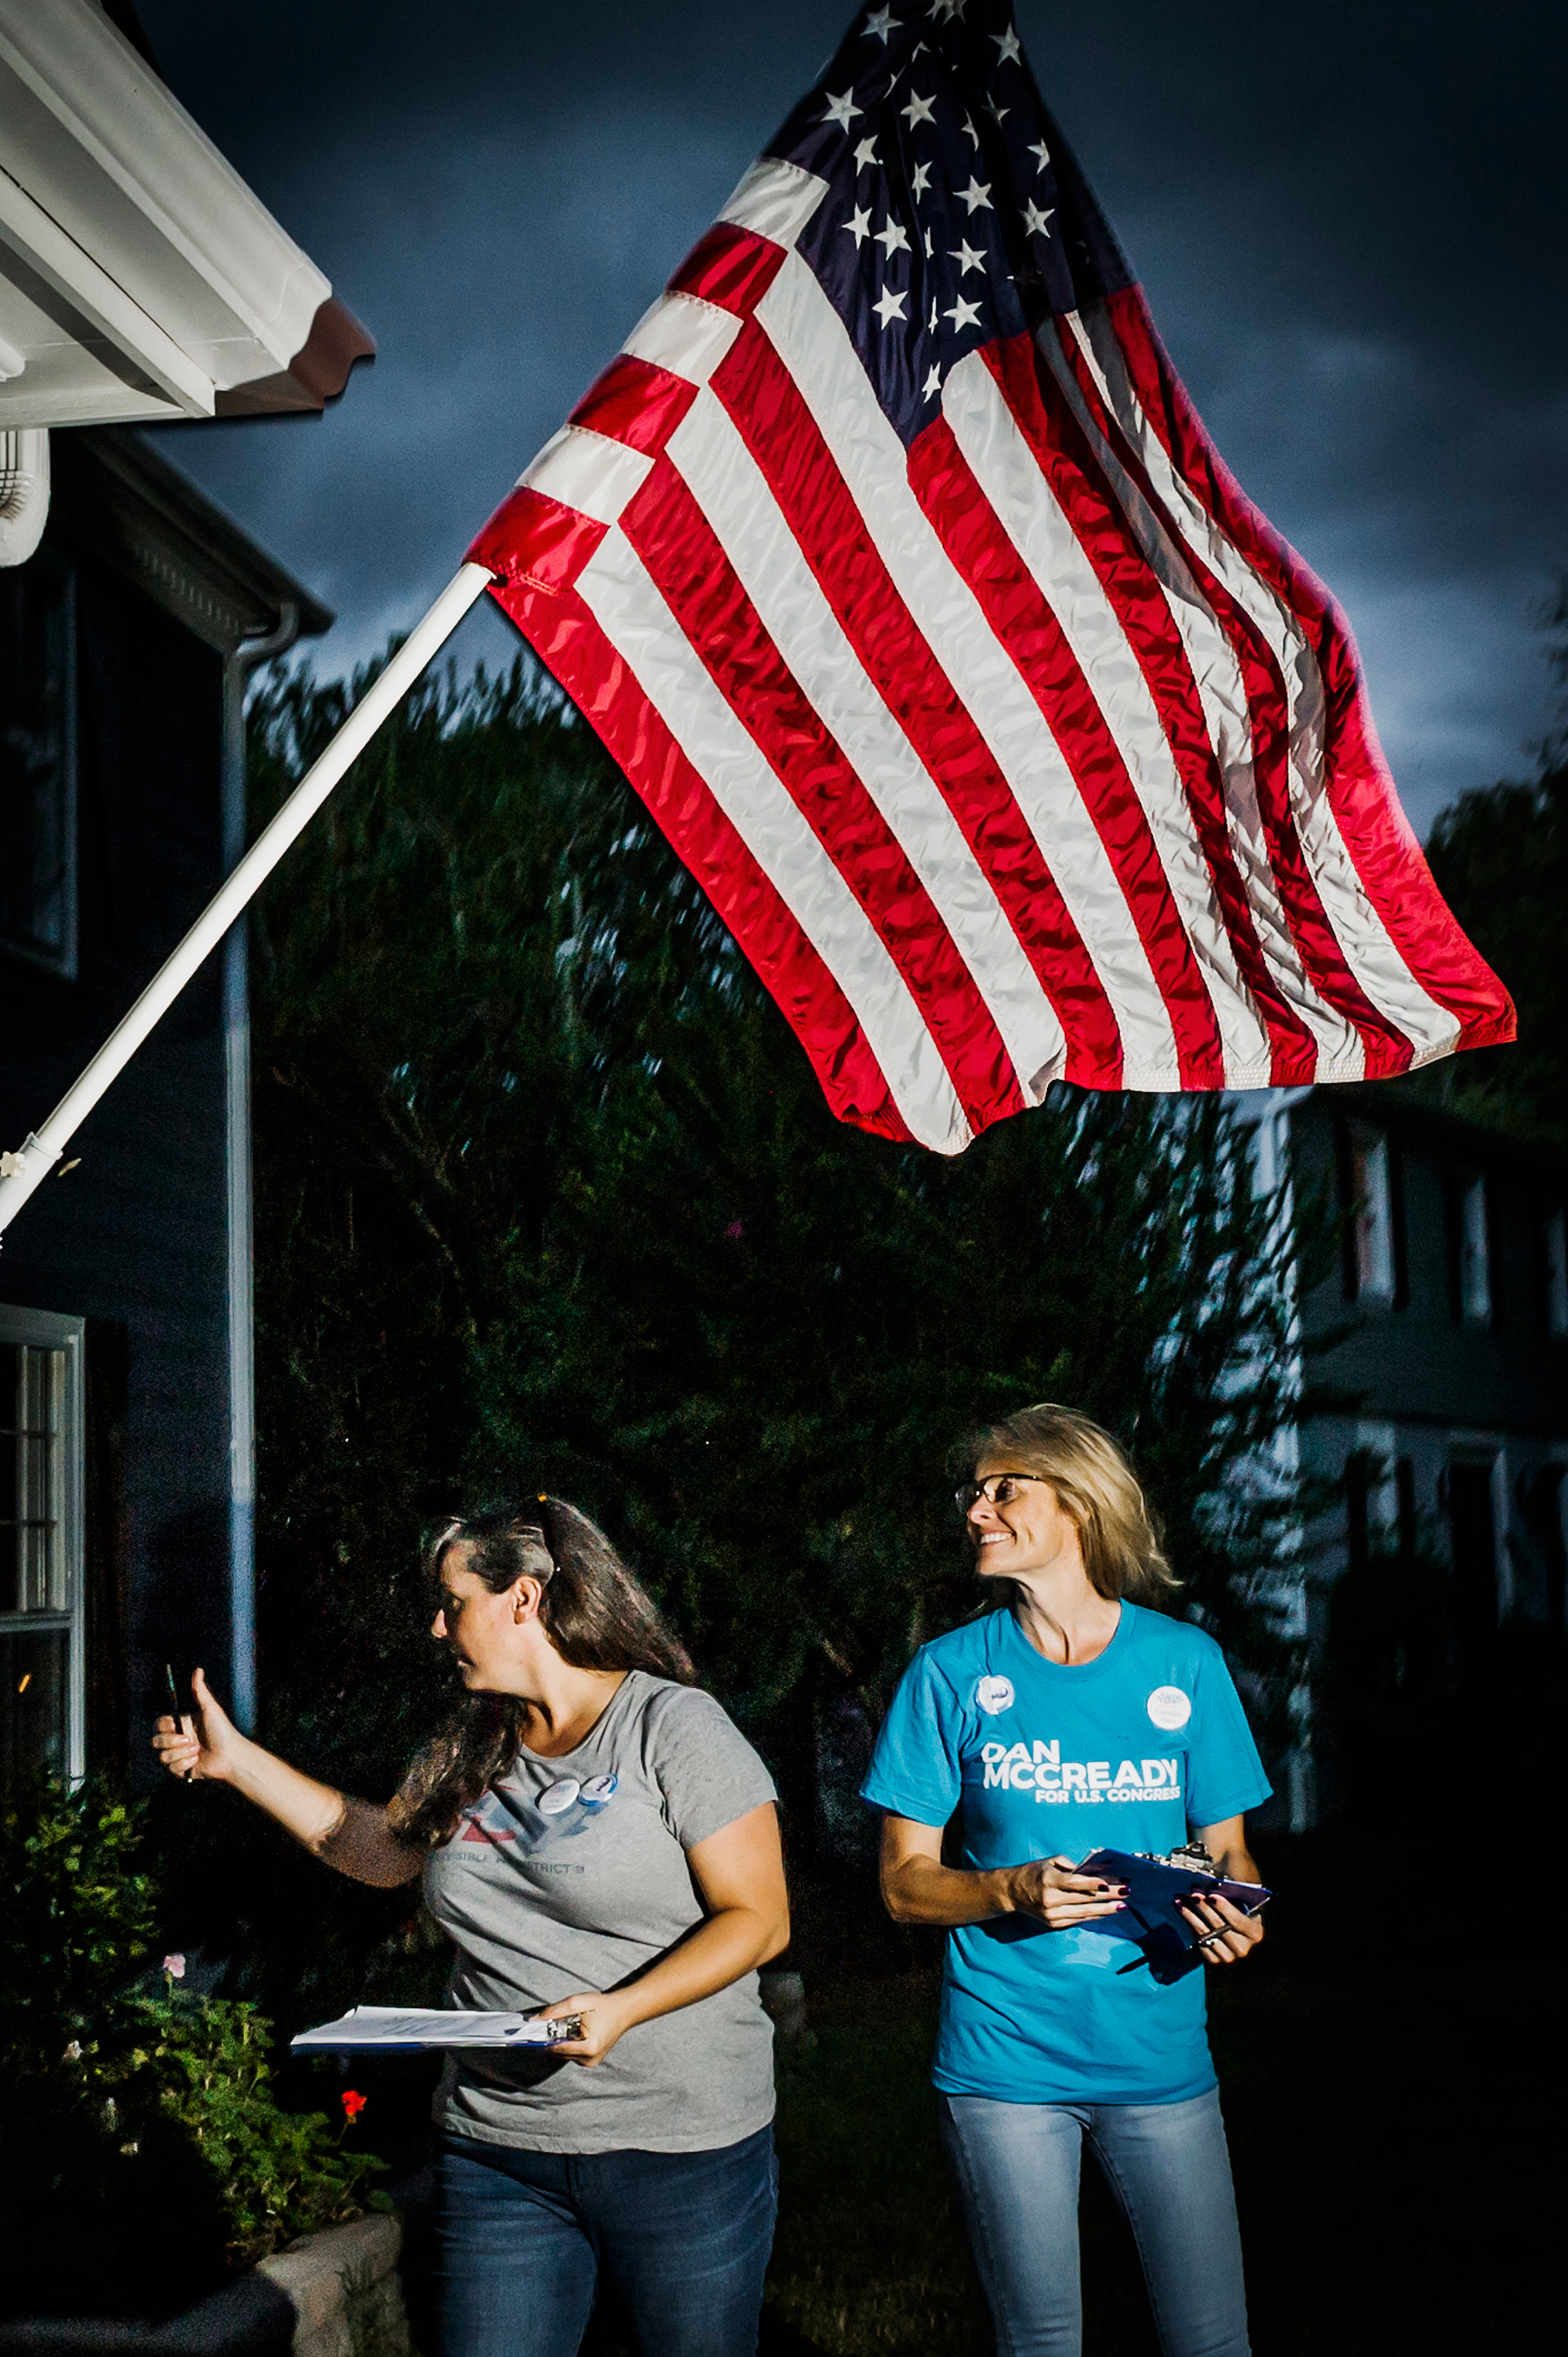 Indivisible N.C. 9 is just one platoon in a volunteer army that took the field after Trump’s election in 2016. (Photograph by Dina Litovsky—Redux for TIME)